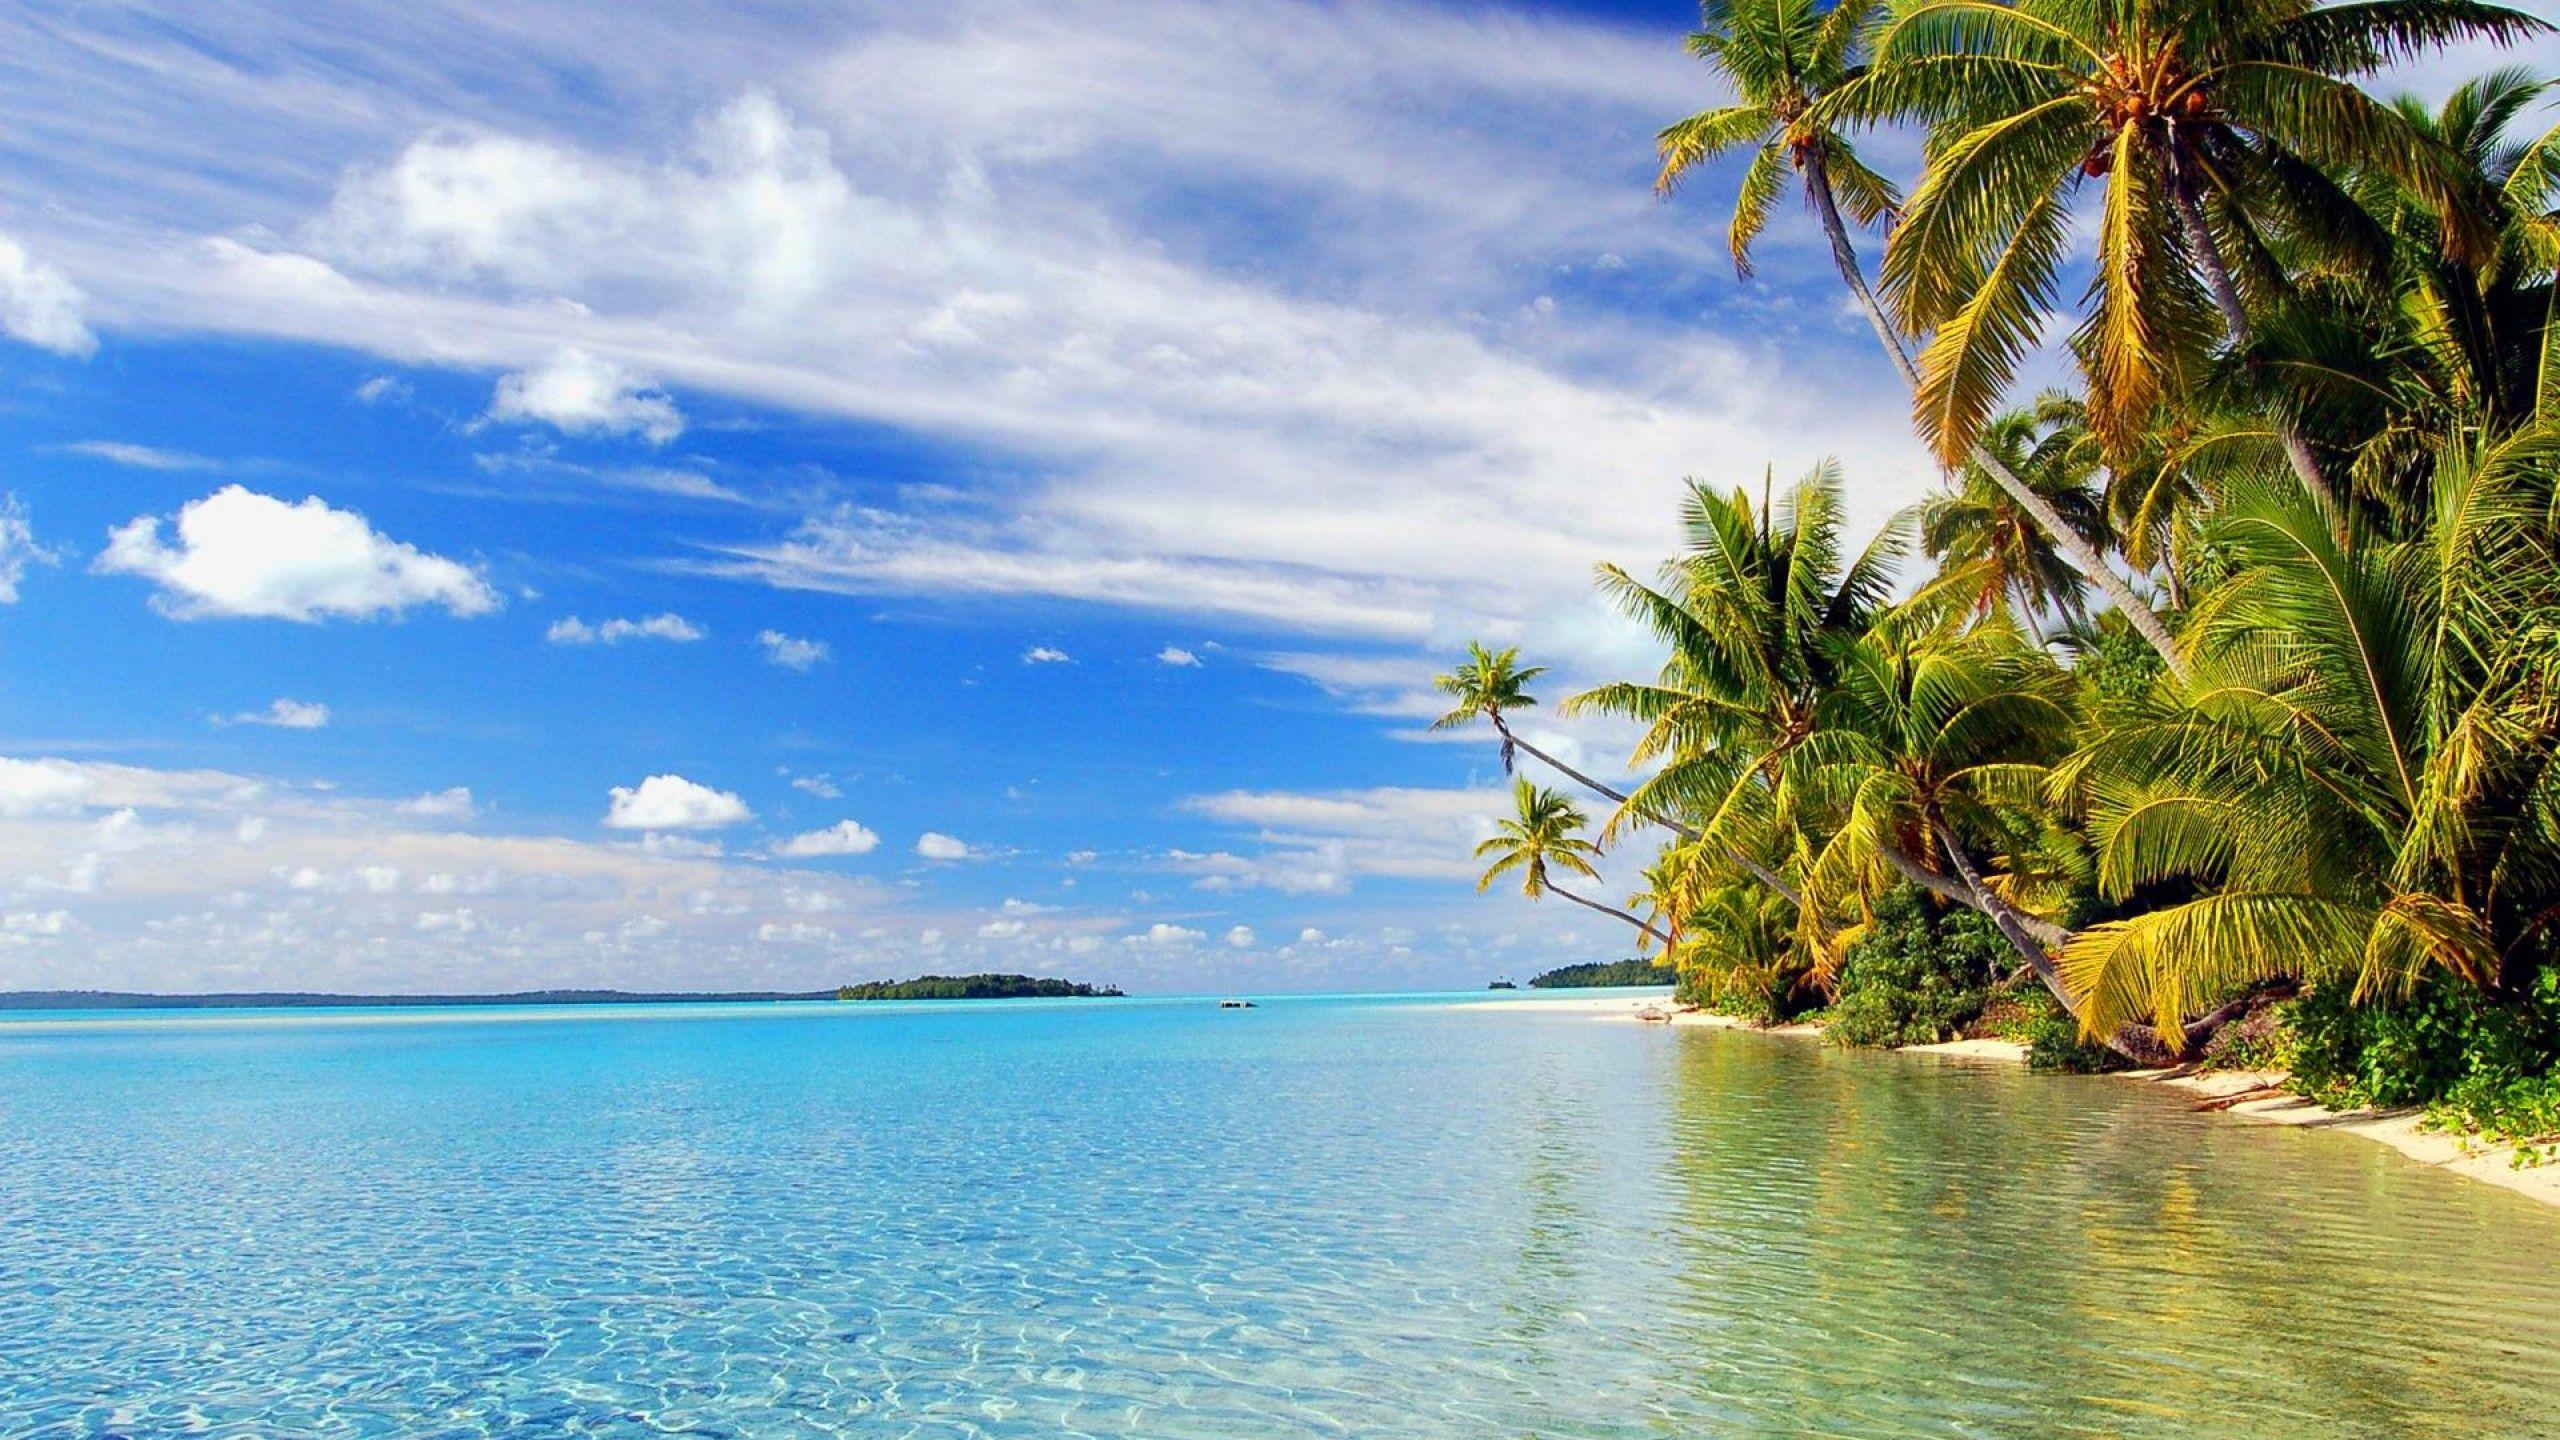 Tropical Beach Landscape Wallpapers - Top Free Tropical Beach Landscape ...